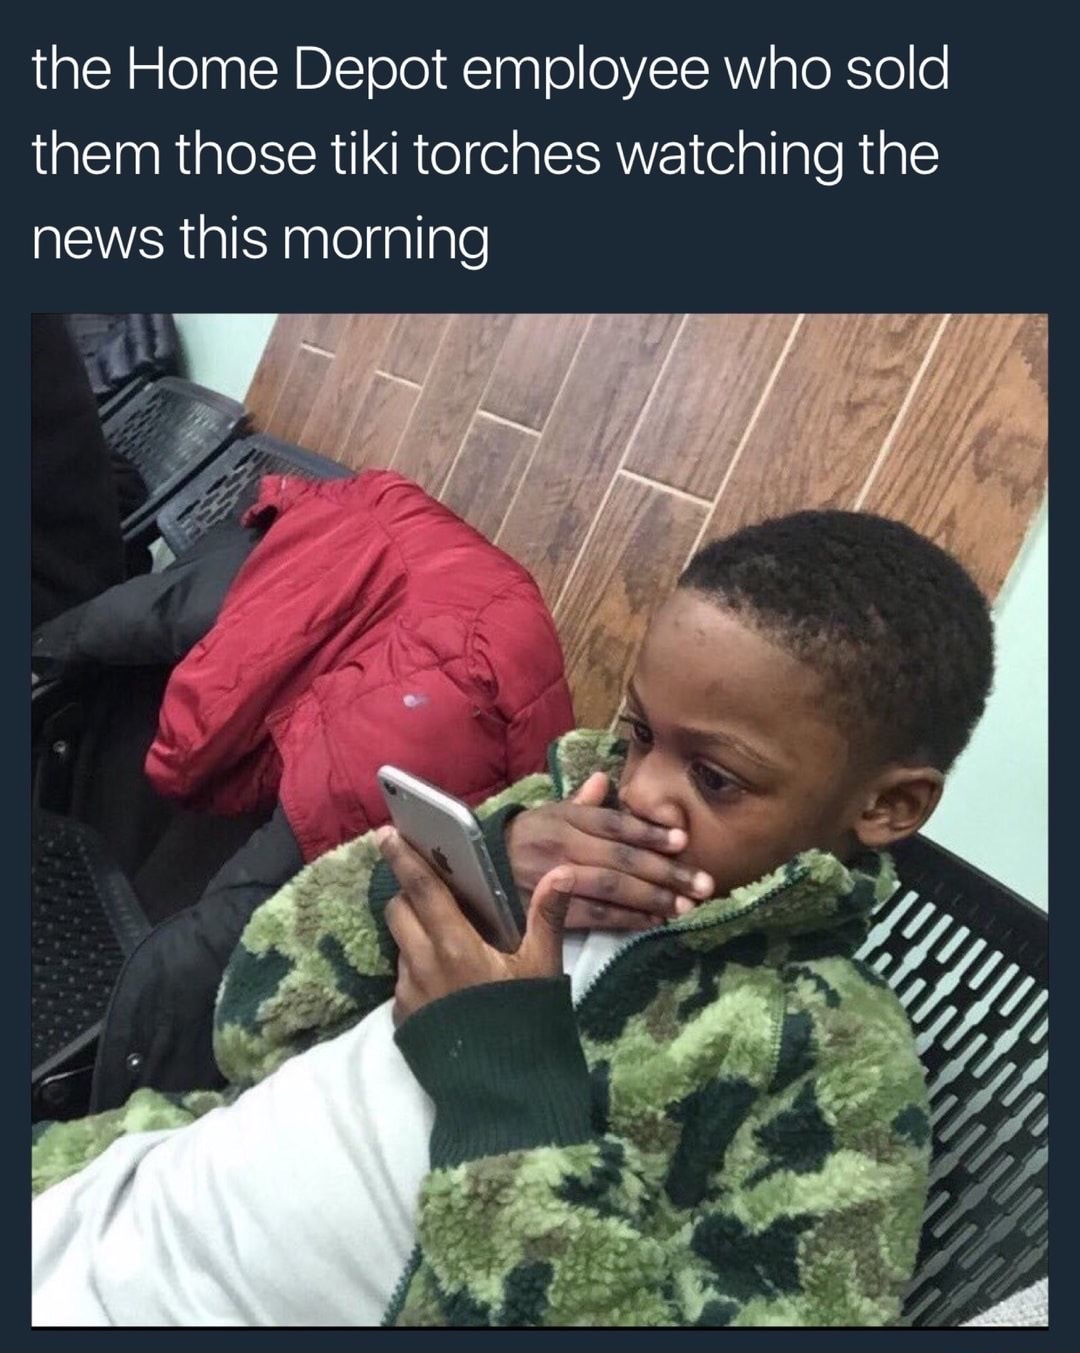 Kid gasping at his phone captioned as Home Depot employee who sold them thos tiki torches watching the news the next morning.